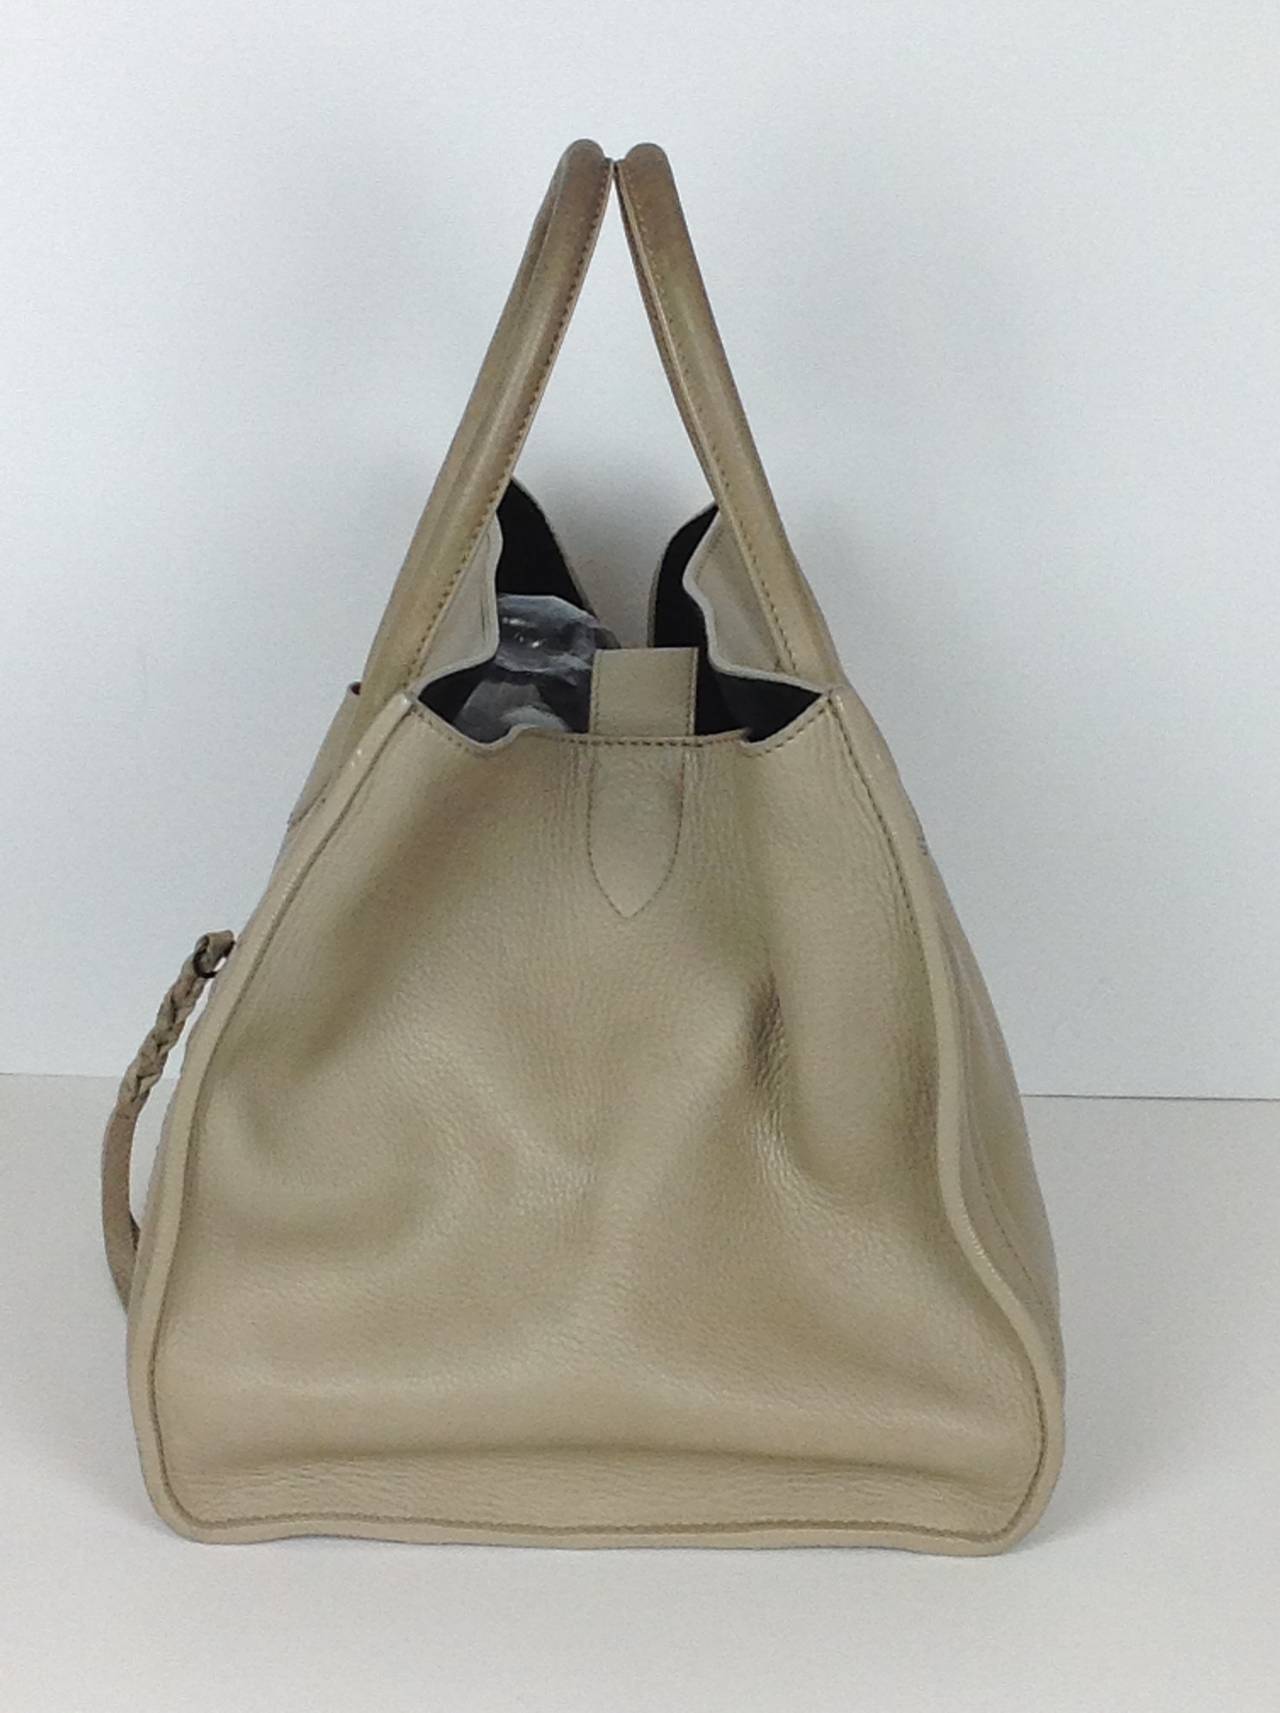 Tan Celine Phantom luggage tote  Fashionista Favorite In Good Condition For Sale In Palm Beach, FL